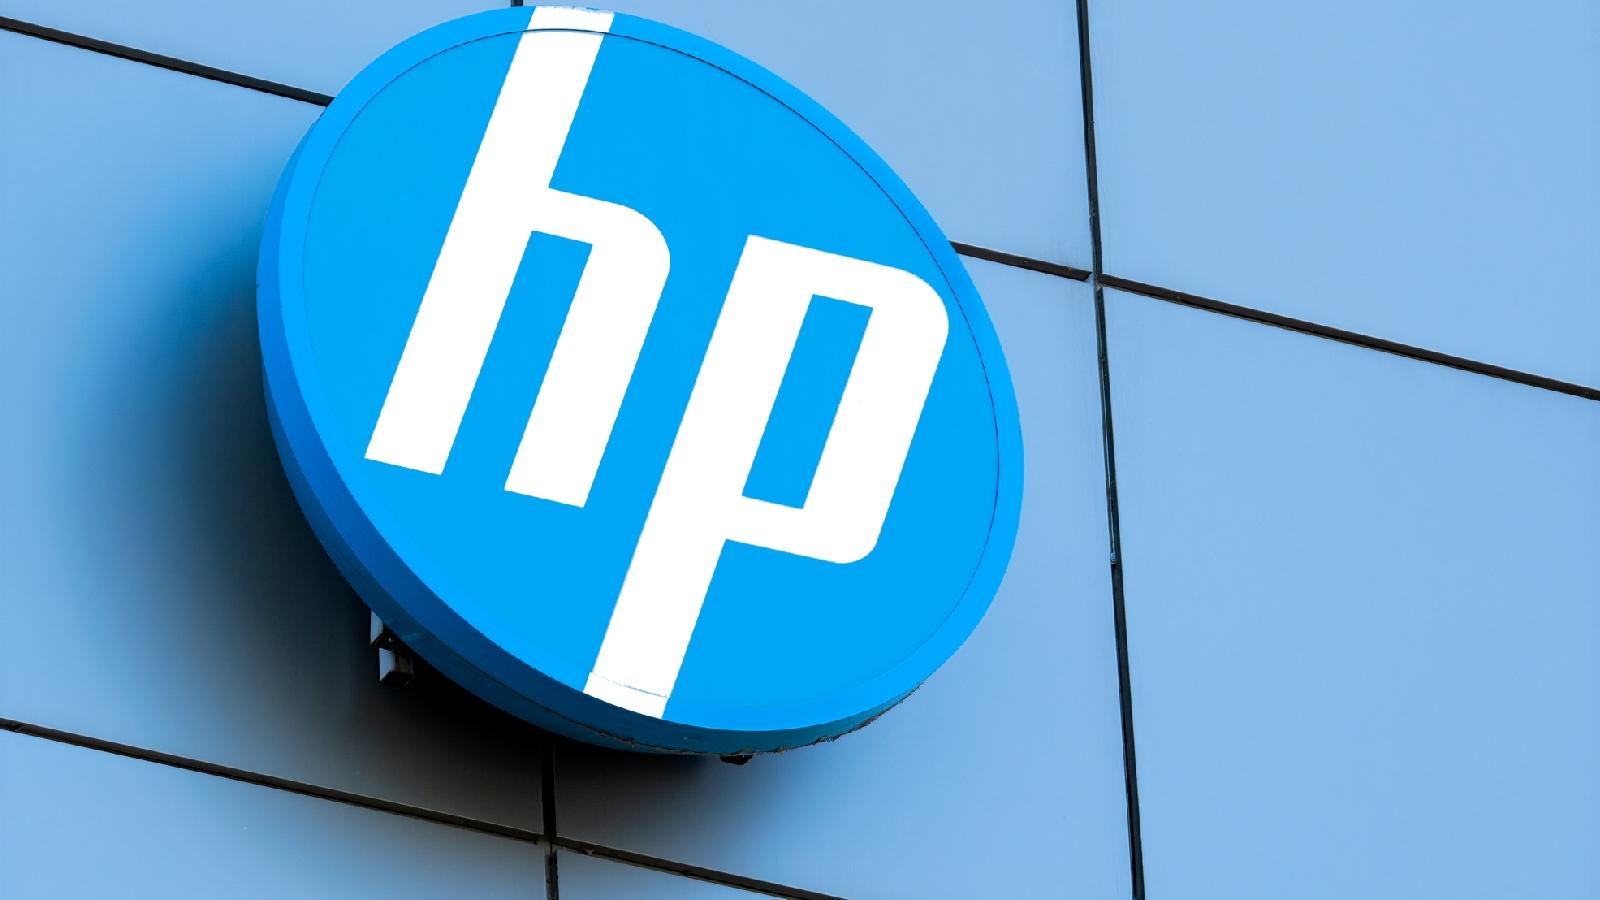 HP acquires Poly with the goal of becoming a full-service hybrid work ecosystem provider